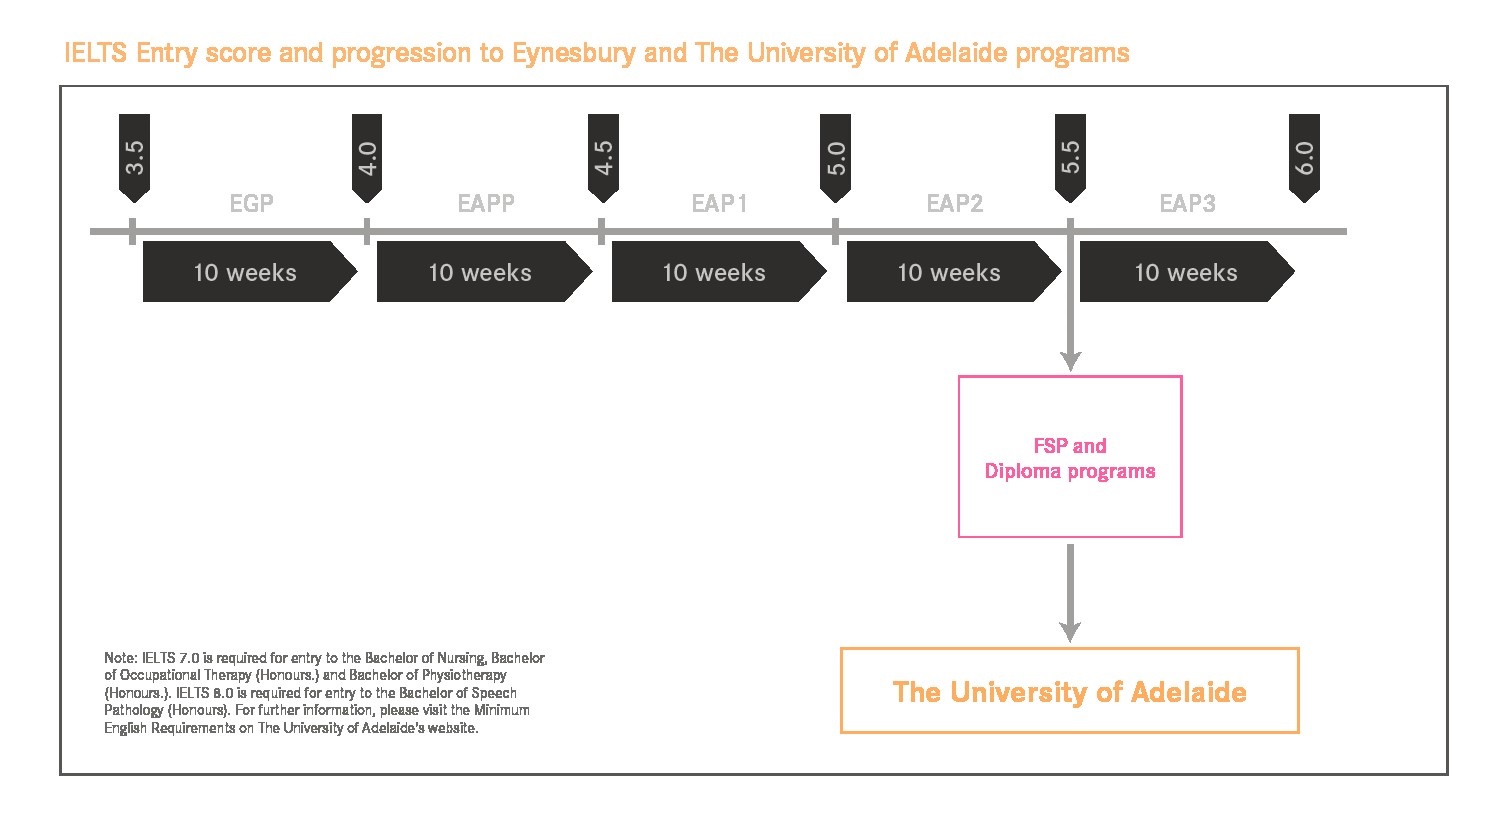 Meet language entry requirements for The University of Adelaide